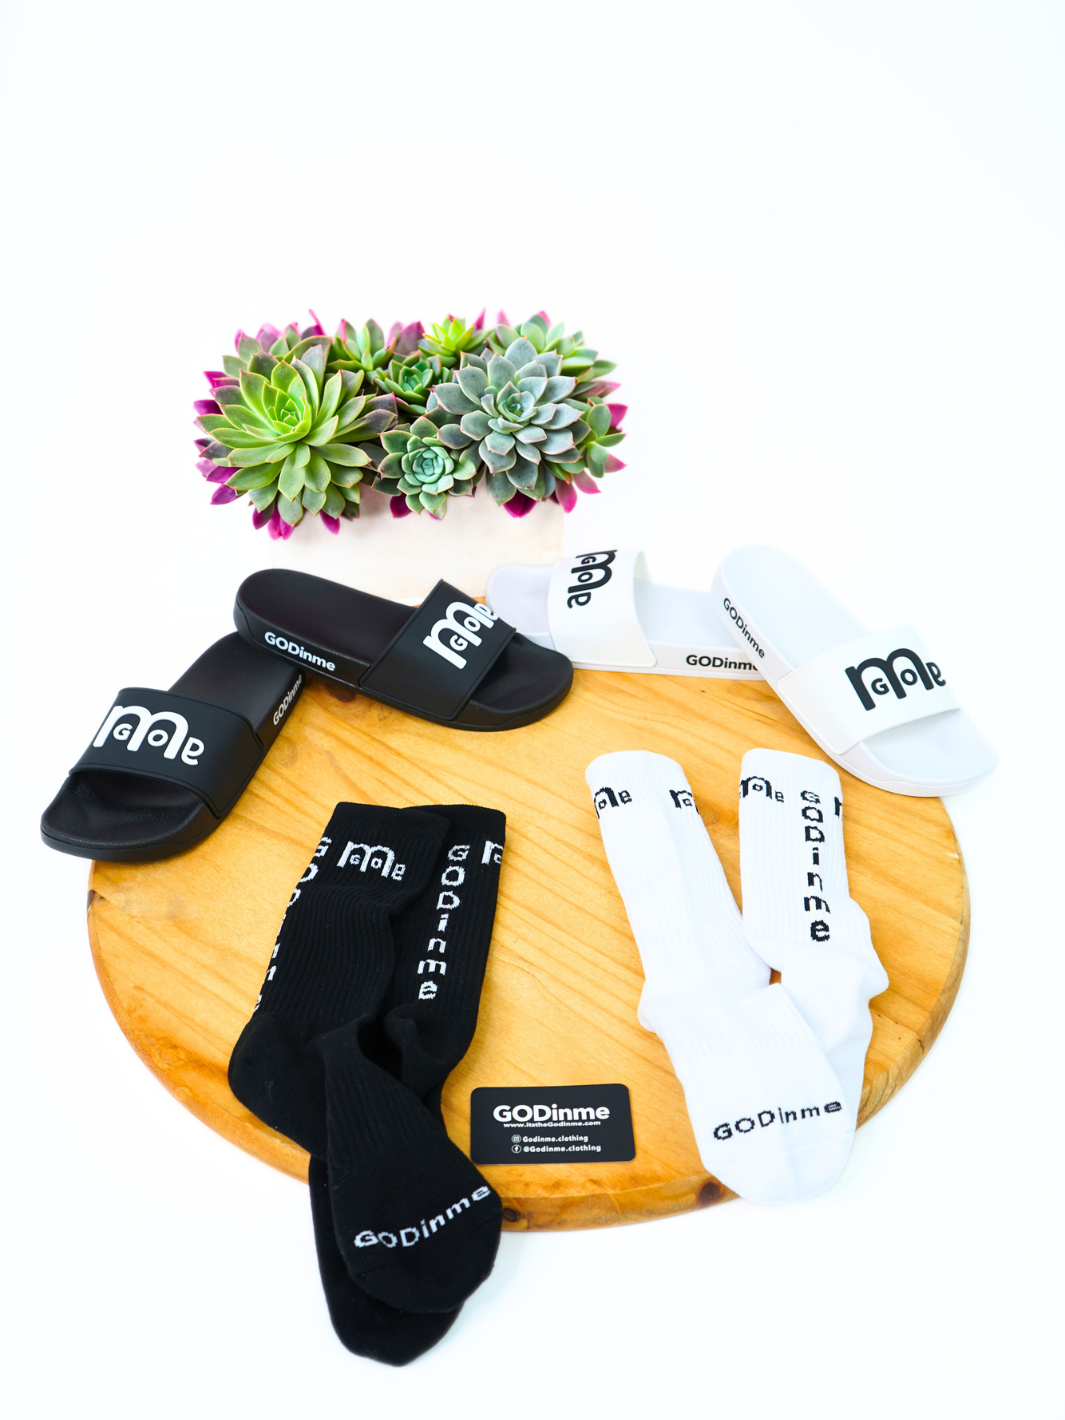 High quality Athletic Socks feature the powerful GODinme logo on each side, and GODinme name at toes and also at back achilles area to provide the confidence and motivation to reach your fitness goals. 